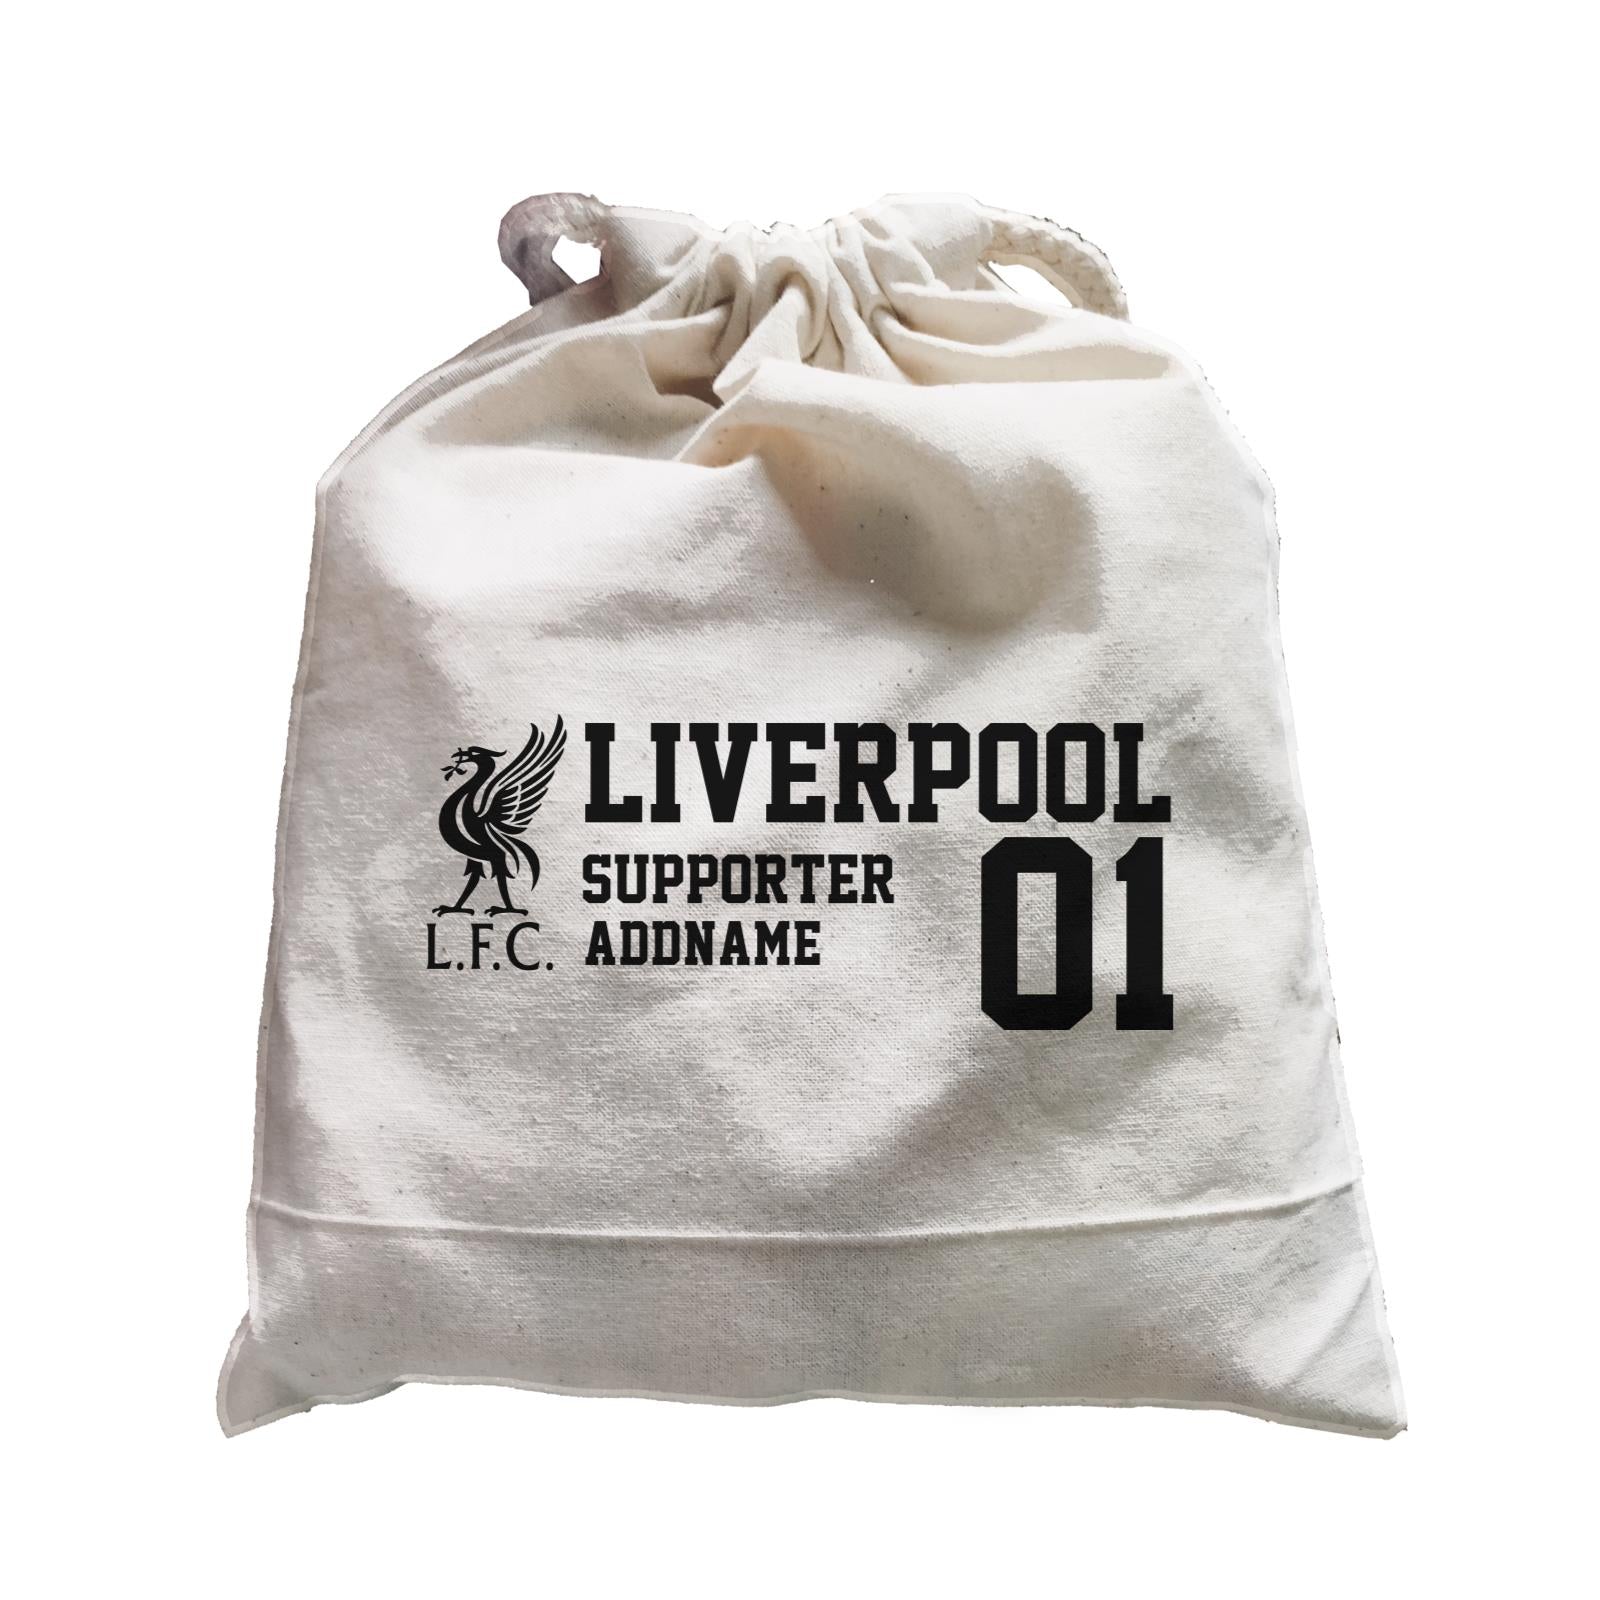 Liverpool Football Supporter Accessories Addname Satchel